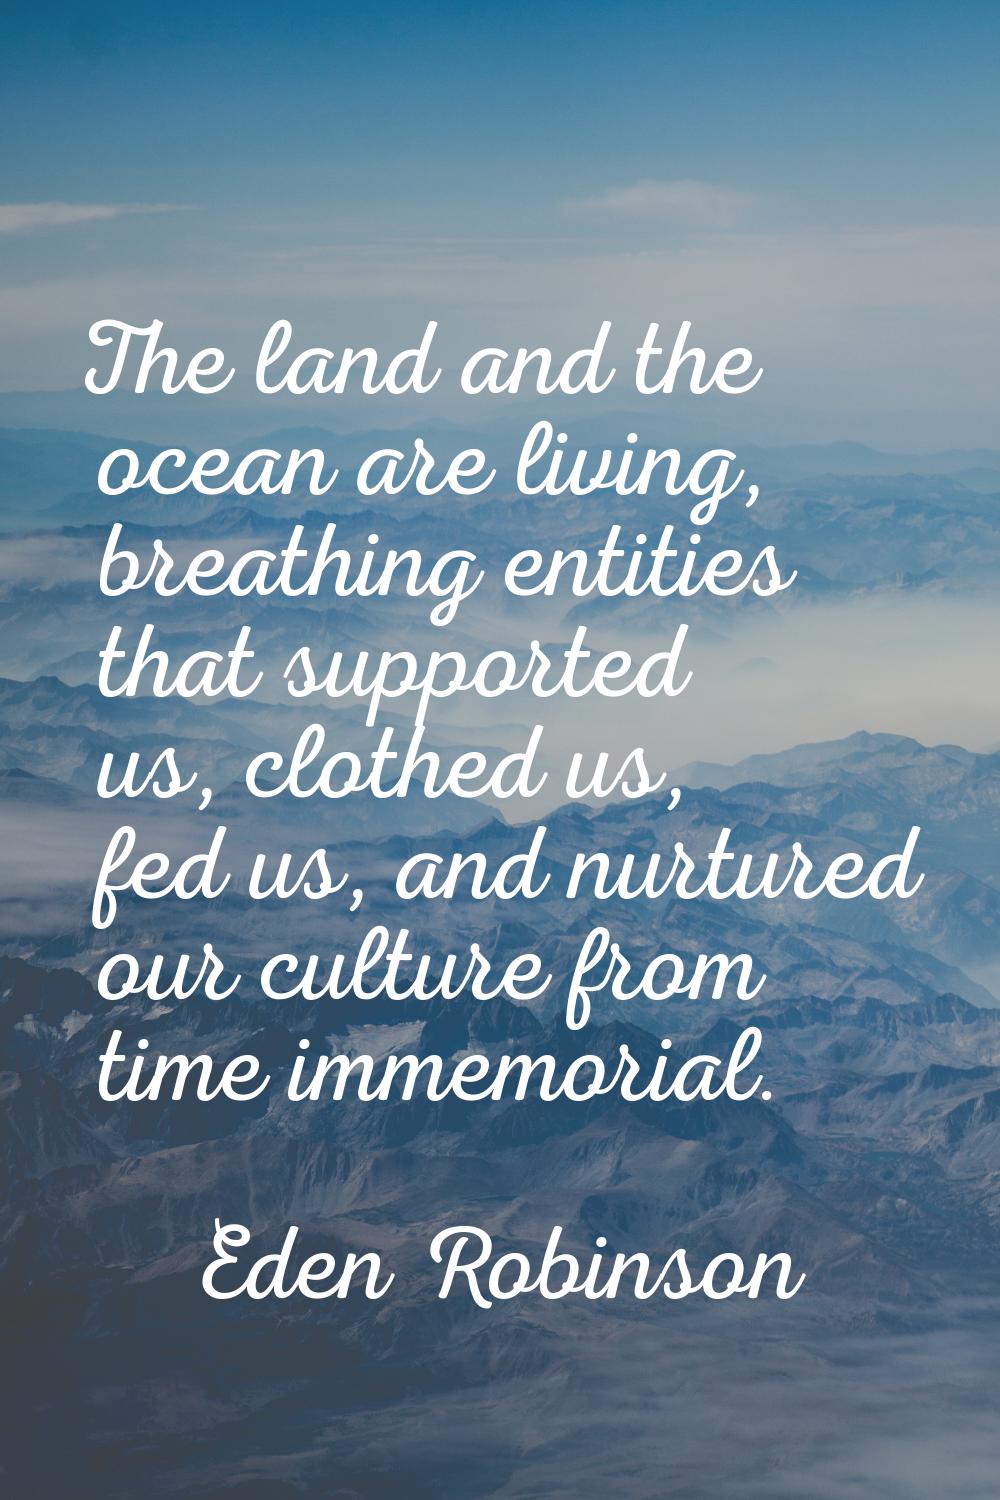 The land and the ocean are living, breathing entities that supported us, clothed us, fed us, and nu